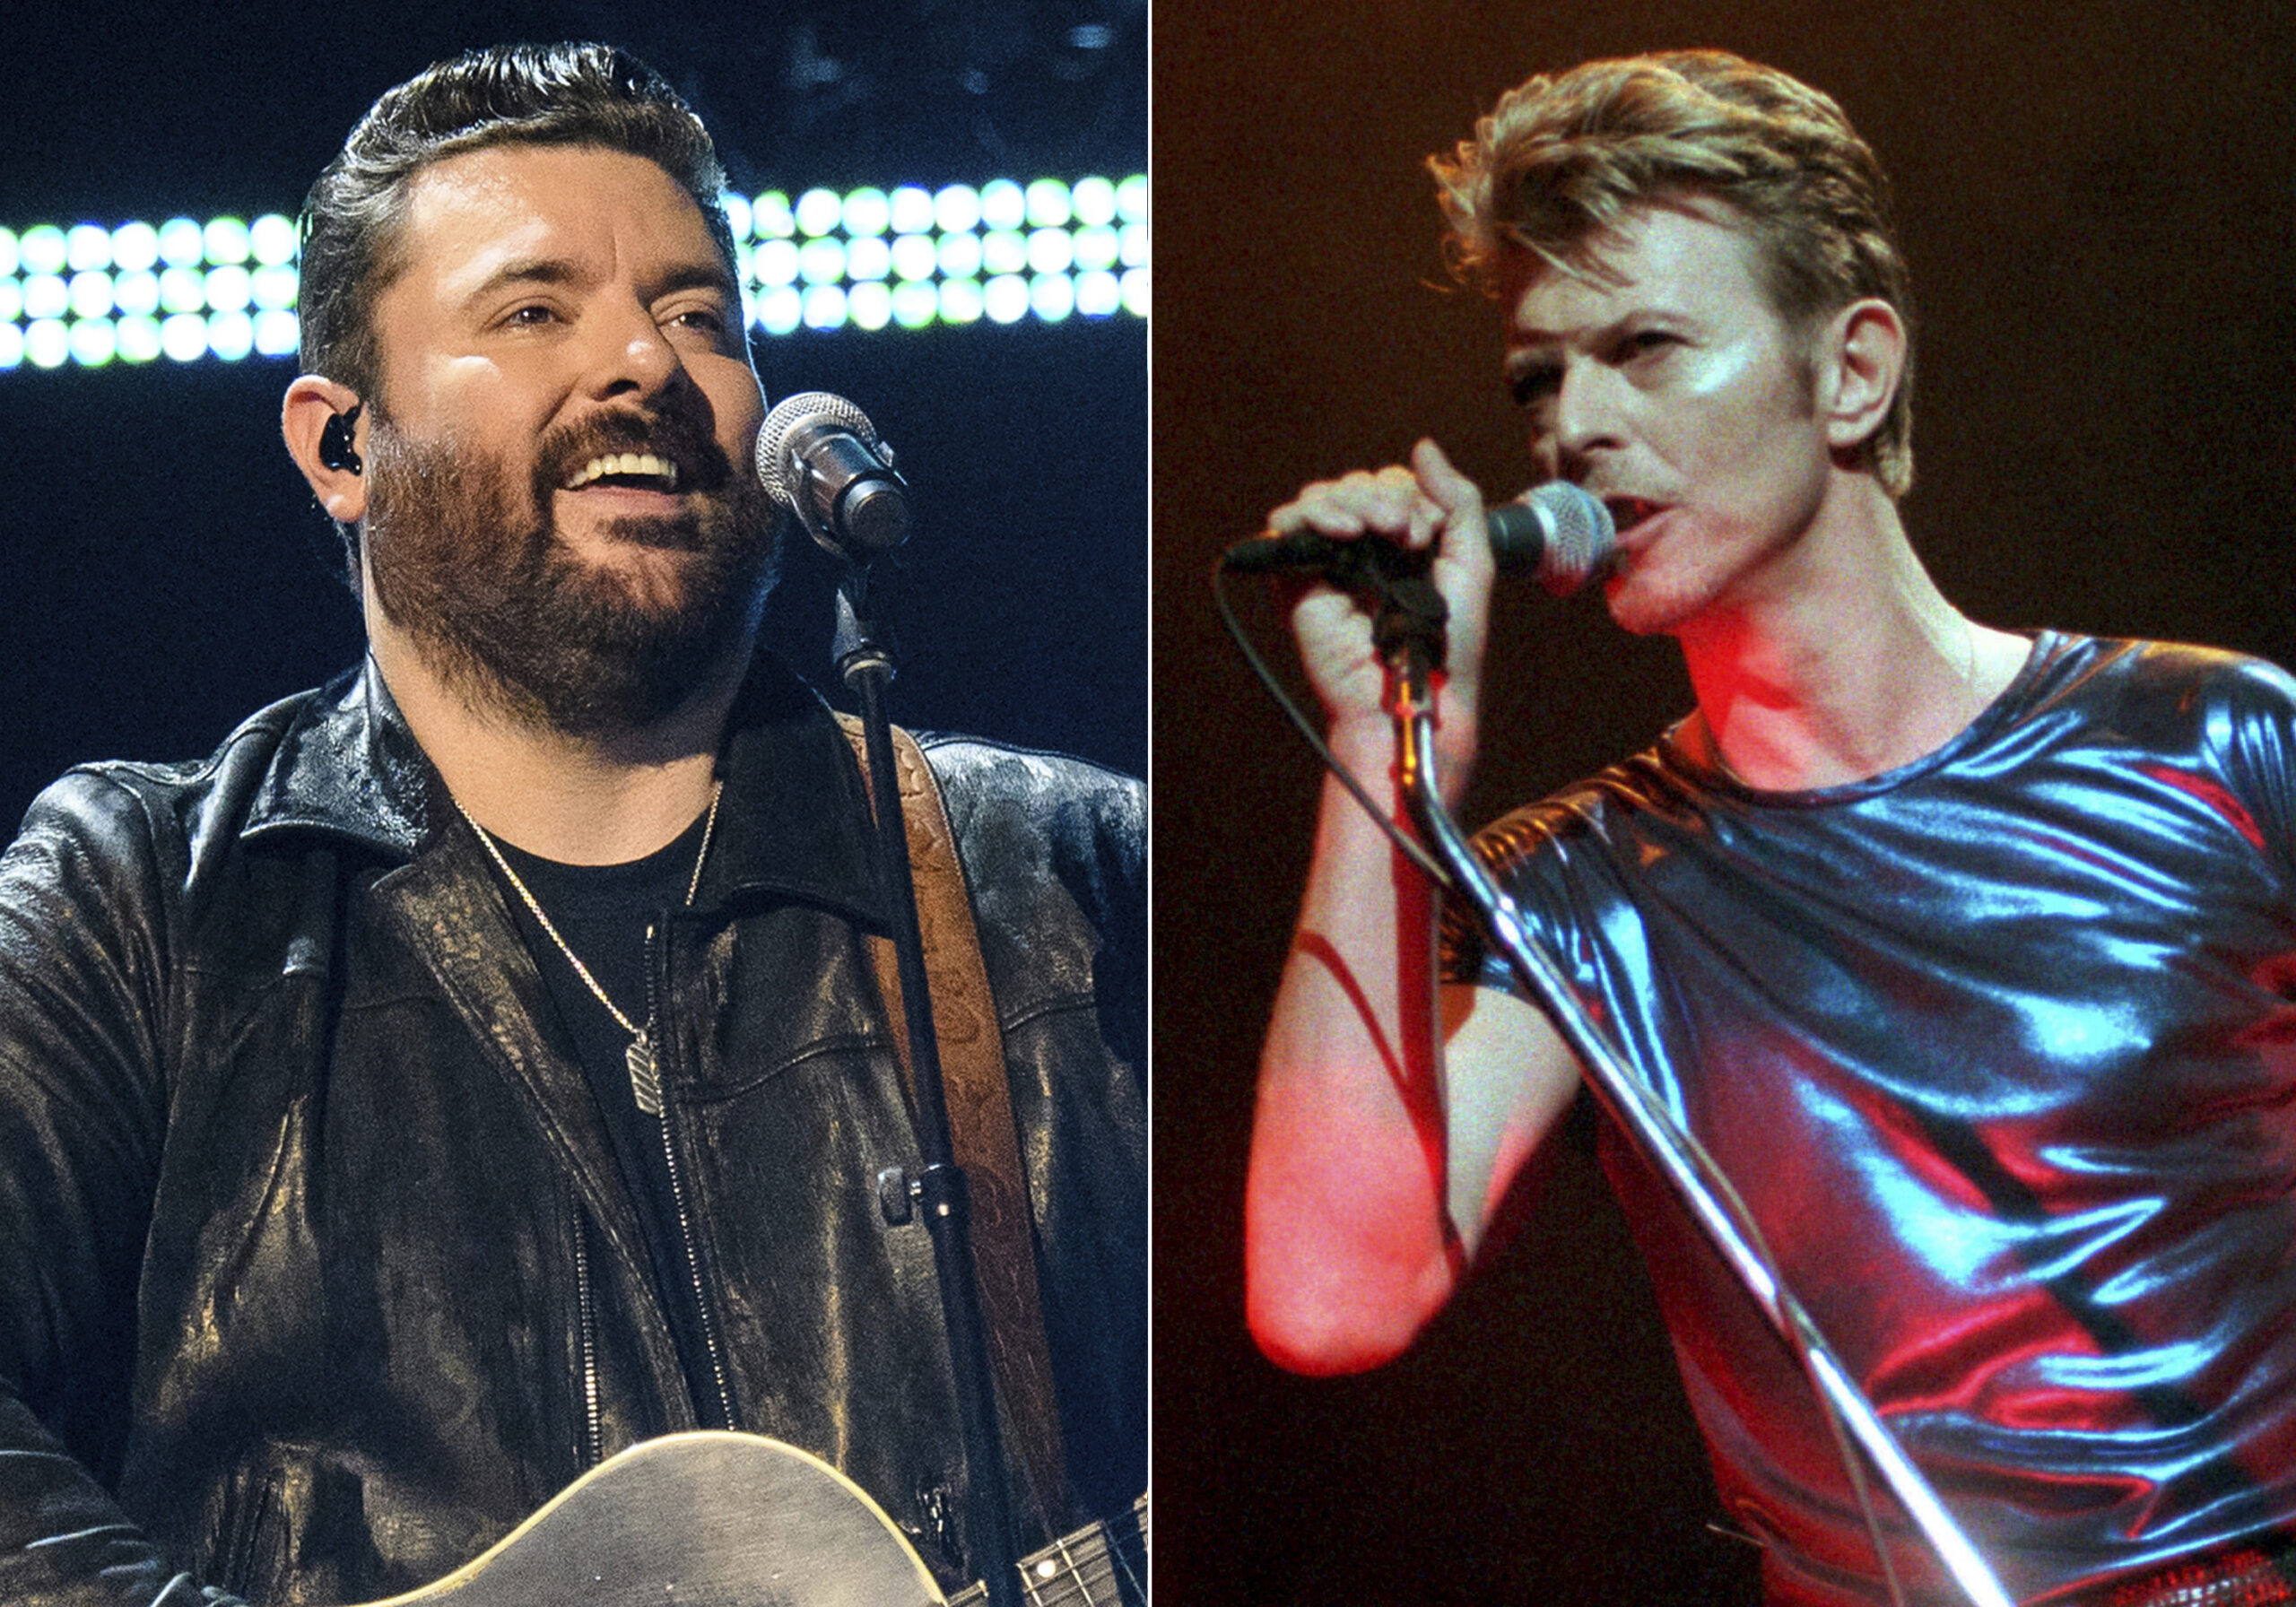 The guitar lick that opens Chris Young's latest single, “Young Love & Saturday Nights,” is lifted directly from David Bowie's 1974 hit “Rebel Rebel."